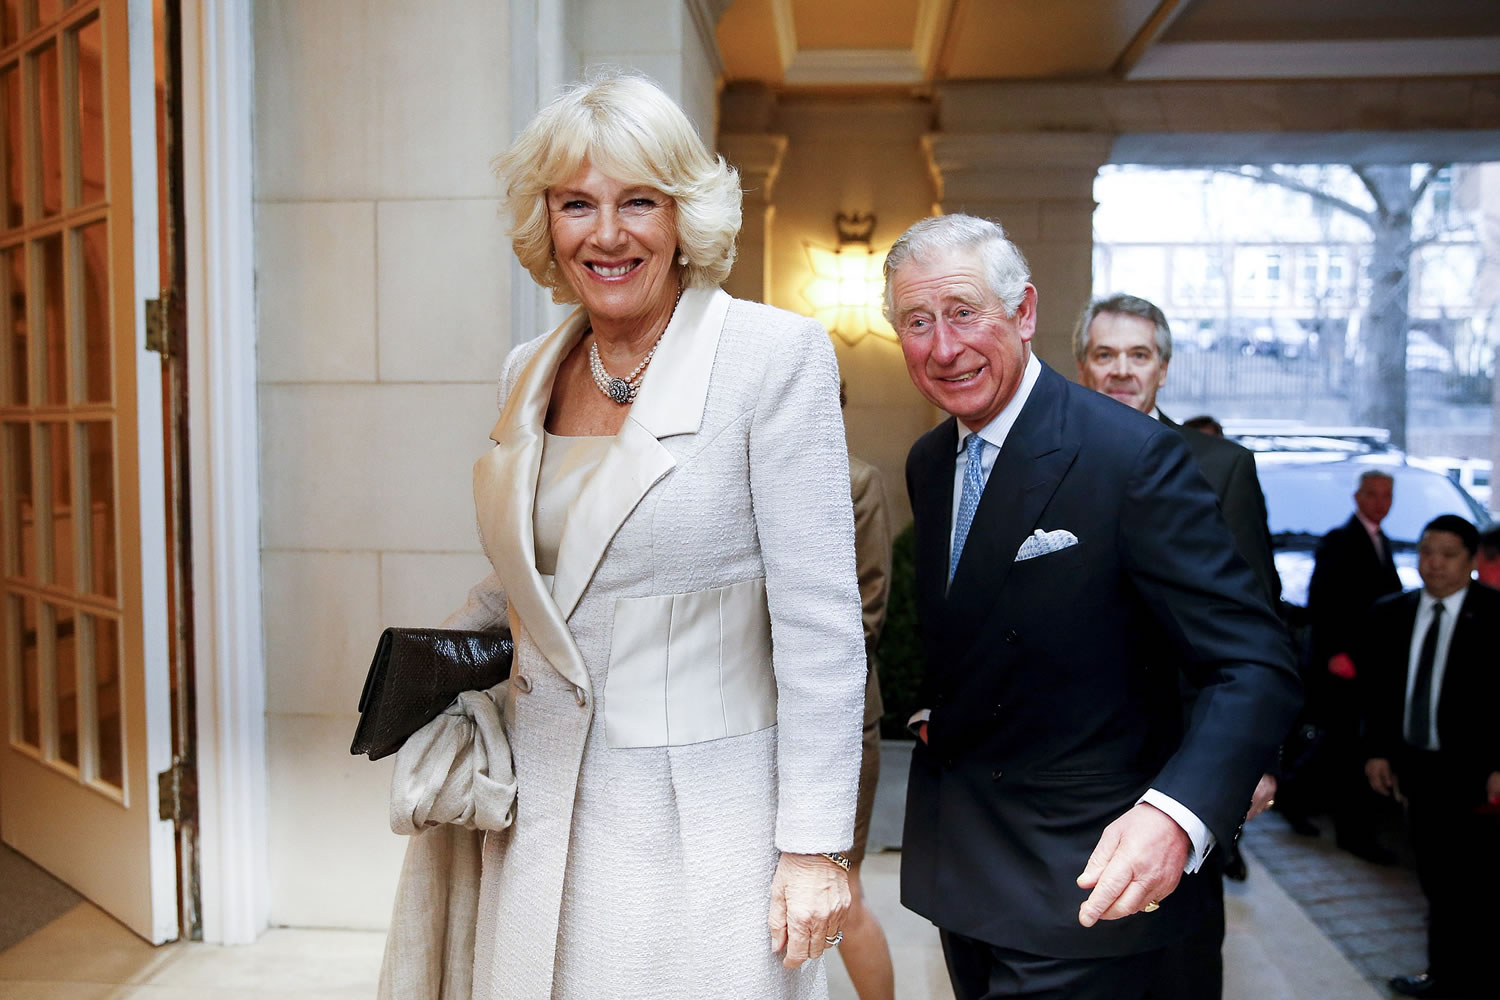 Britain's Prince Charles and Camilla, the Duchess of Cornwall, arrive for a reception at the British Ambassador's residence on Tuesday in Washington.